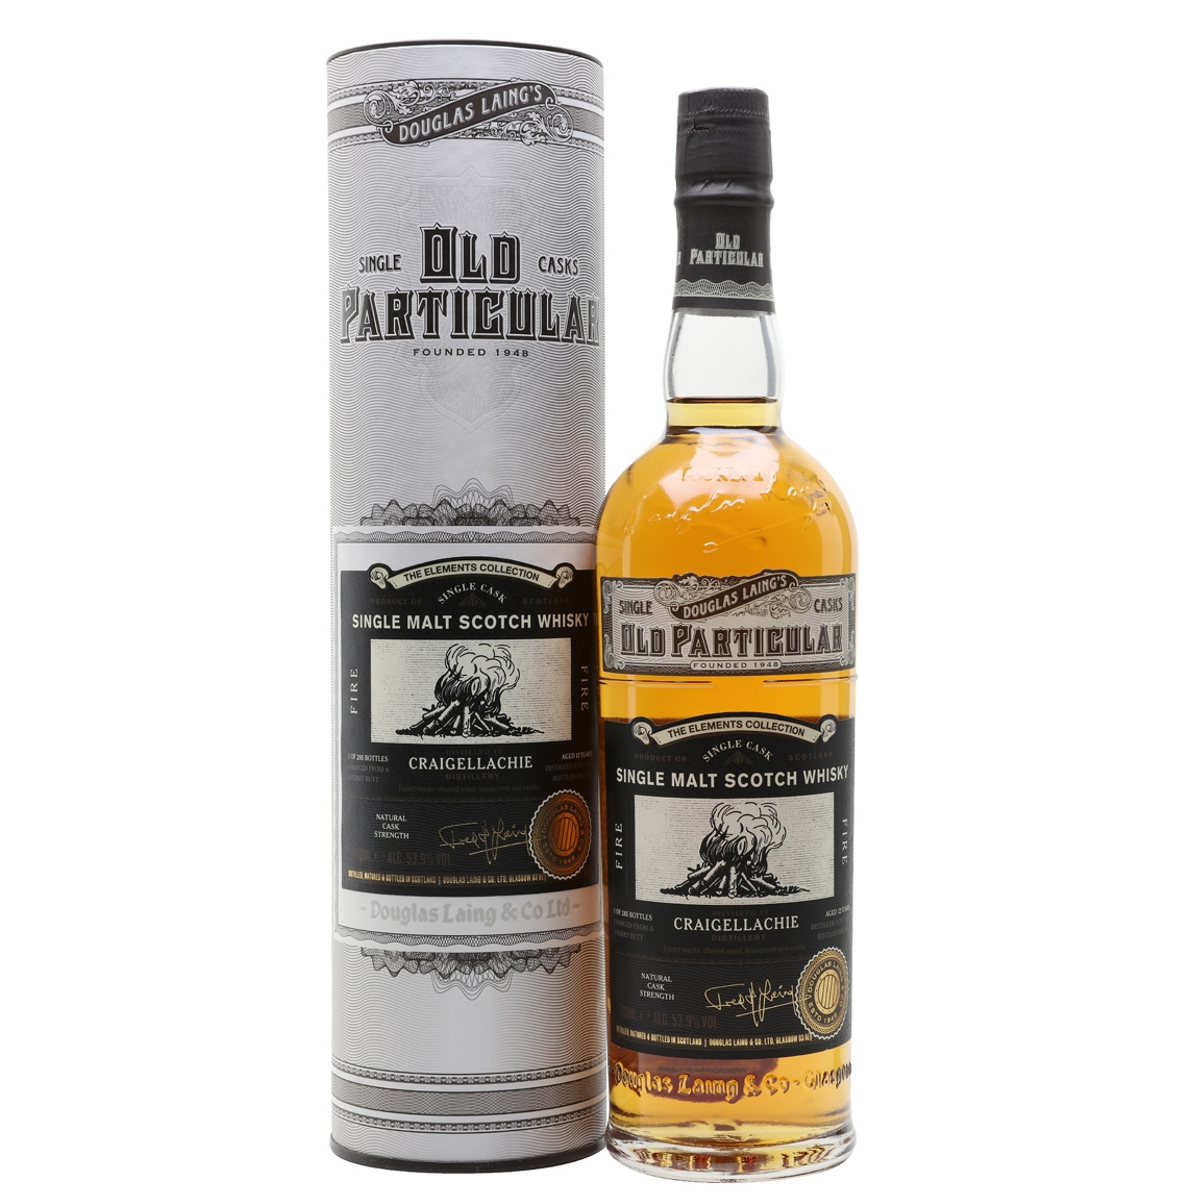 Old Particular ‘Fire’ Craigellachie 12 Years Sherry Single Cask Single Malt Whisky – Speyside Scotland